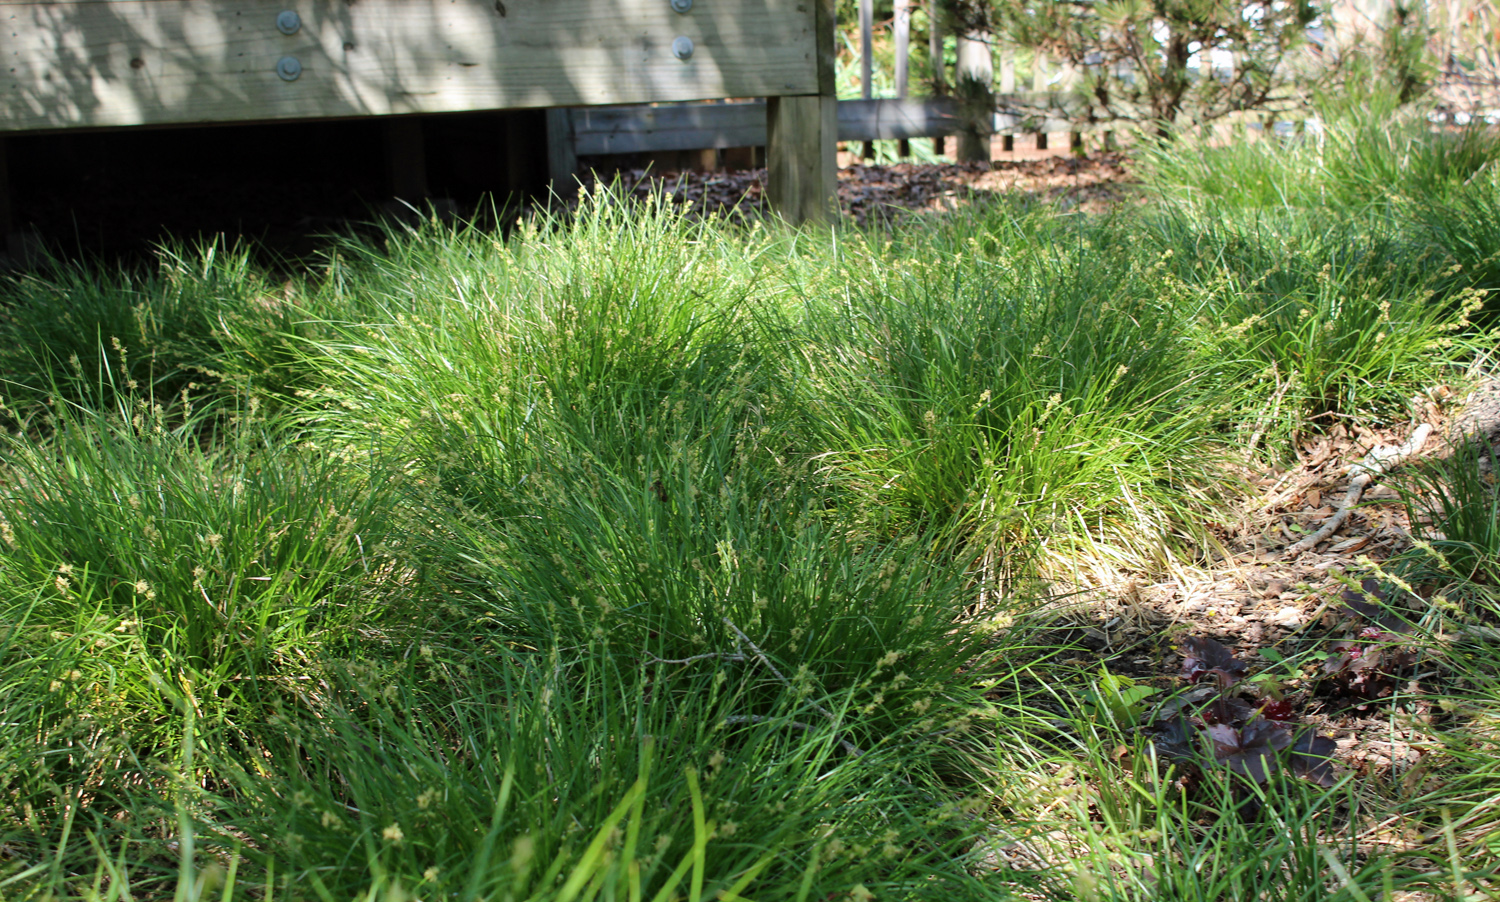 By early April, Carex divulsa is lush and green with emerging inflorescences.